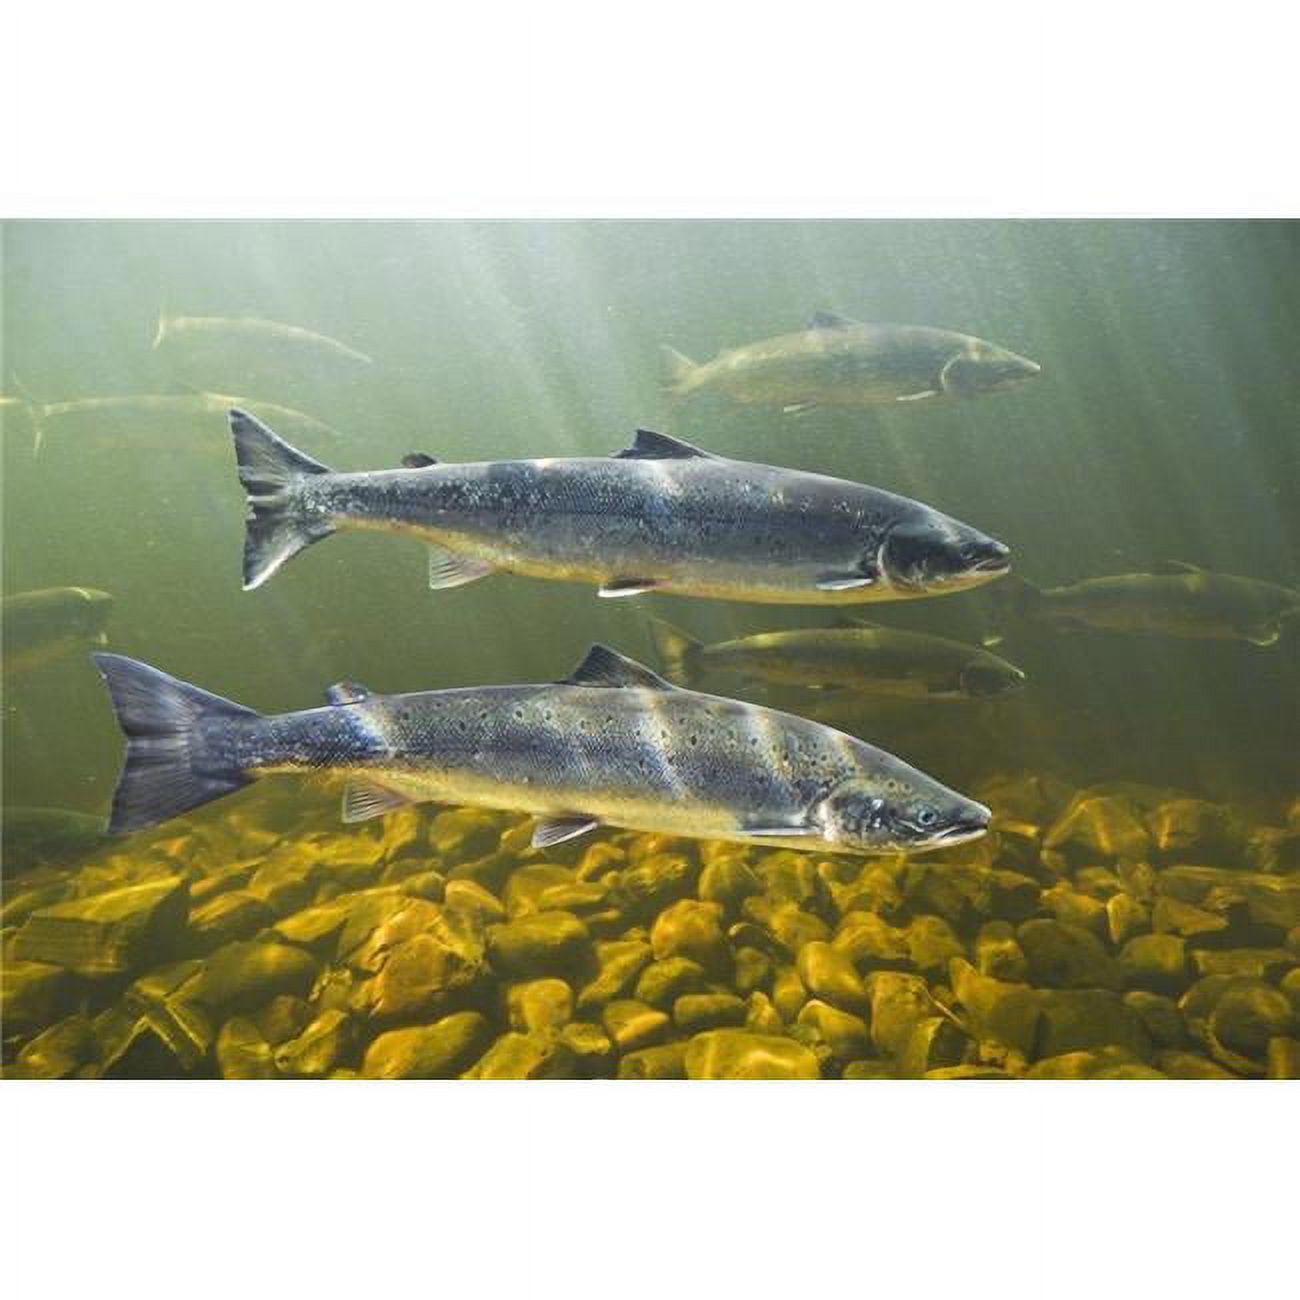 Atlantic Salmon Adults Migrate From Salt Water of North Atlantic Ocean  Upstream Through Freshwater of Their Natal River To Reach Spawning Grounds  Exploits River Newfoundland Poster Print, 34 x 22 